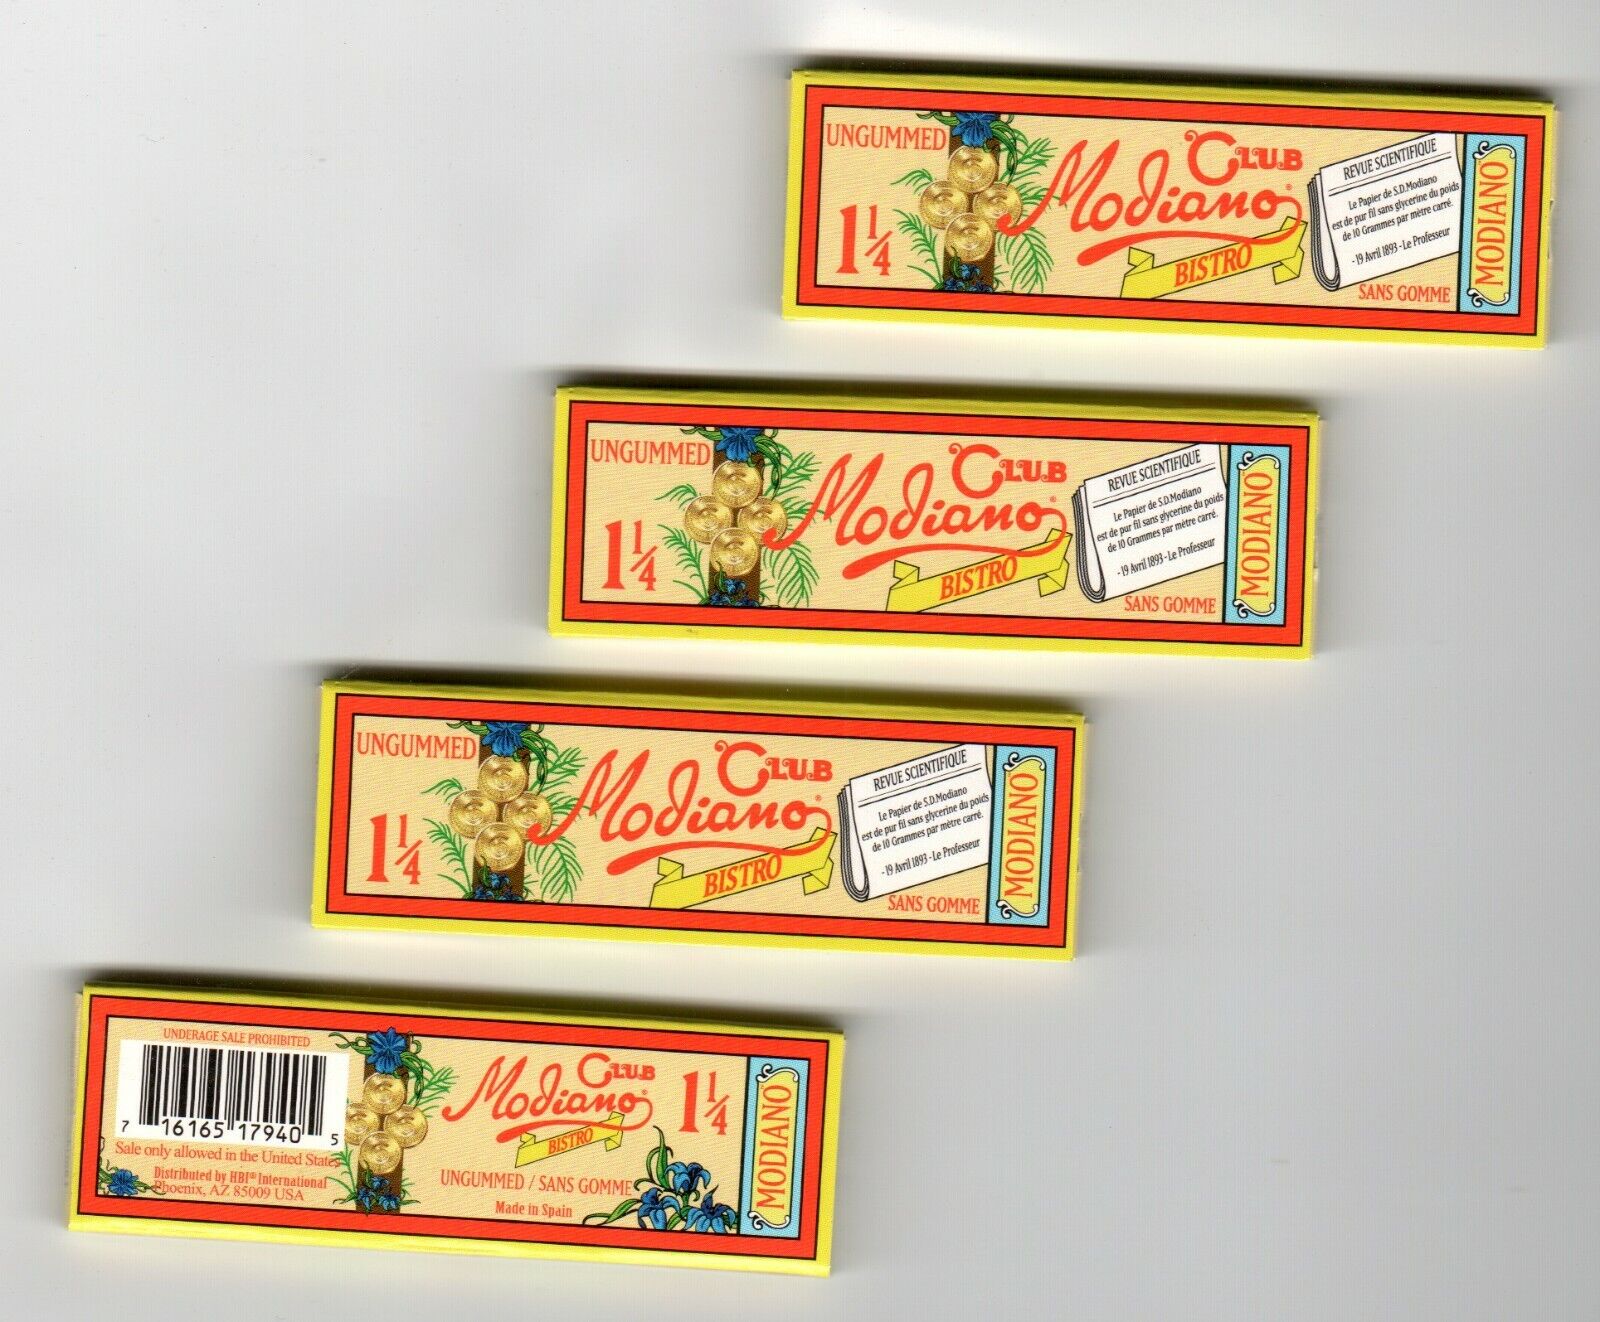 4X Packs of CLUB MODIANO ROLLING PAPERS 1 1/4 SIZE UNGUMMED 32 LEAVES PER PACK 